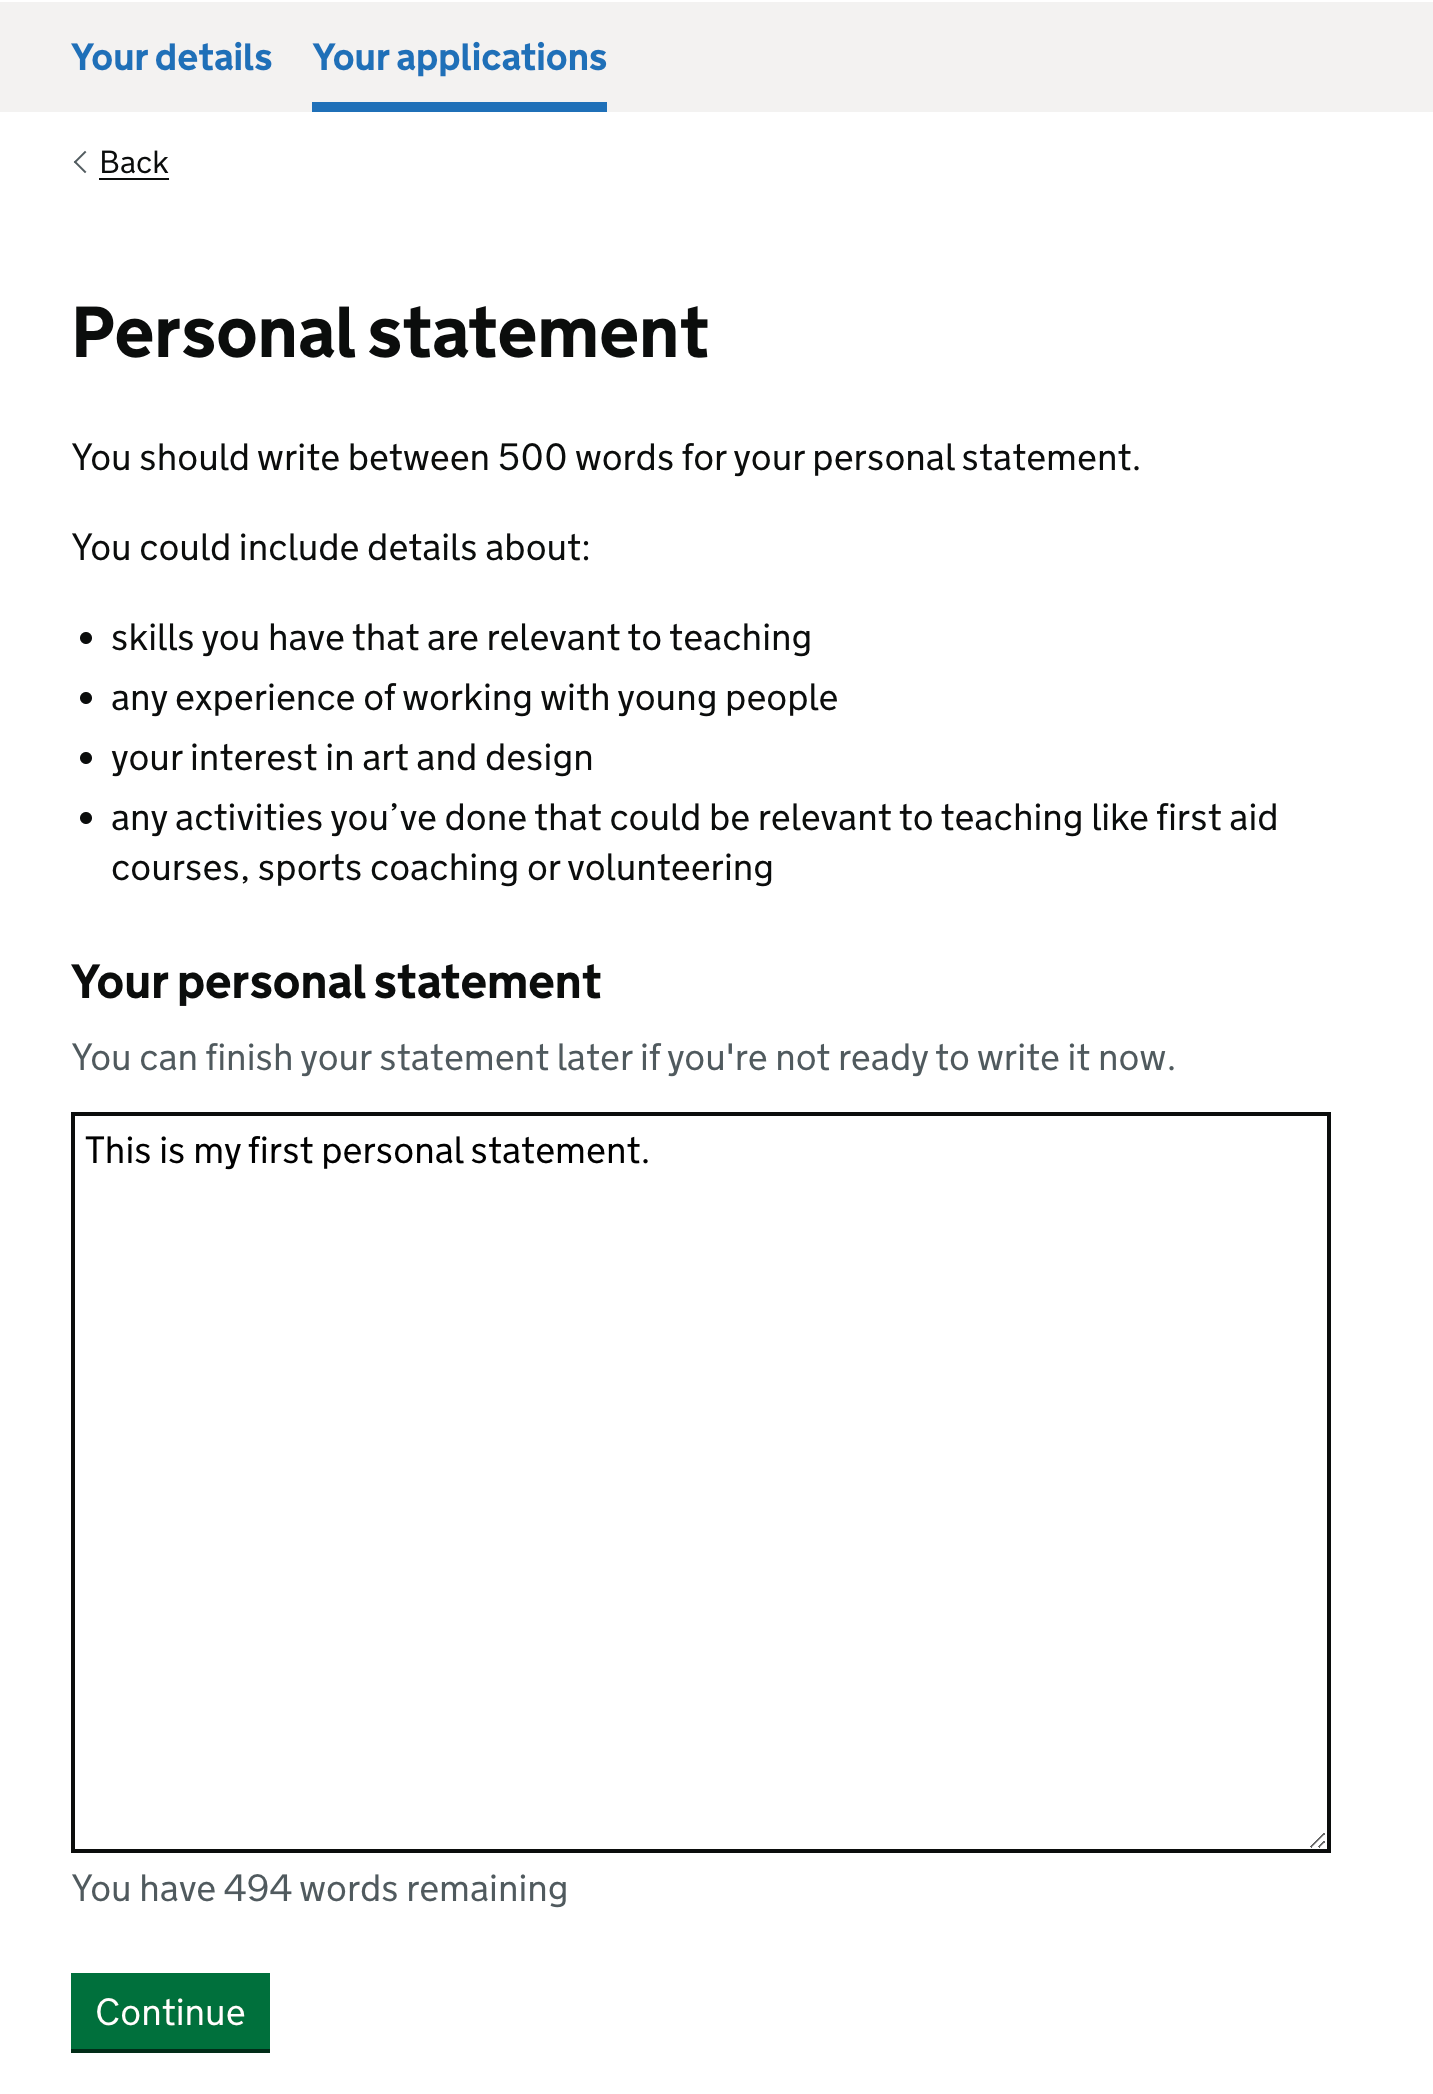 Screenshot showing the personal statement question asking candidates to write a 500 word personal statement.